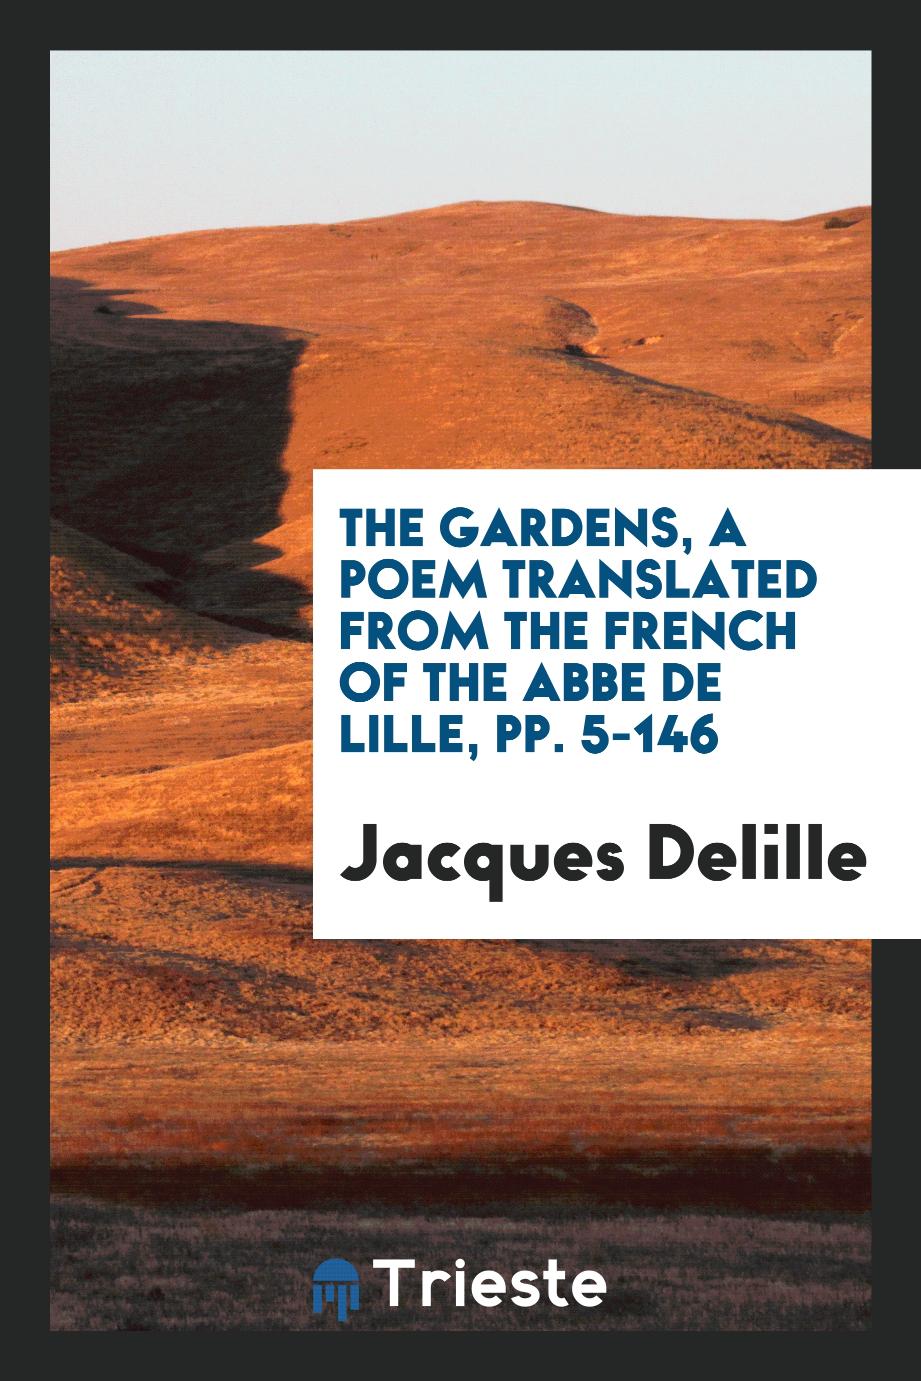 The Gardens, a Poem Translated from the French of the Abbe De Lille, pp. 5-146